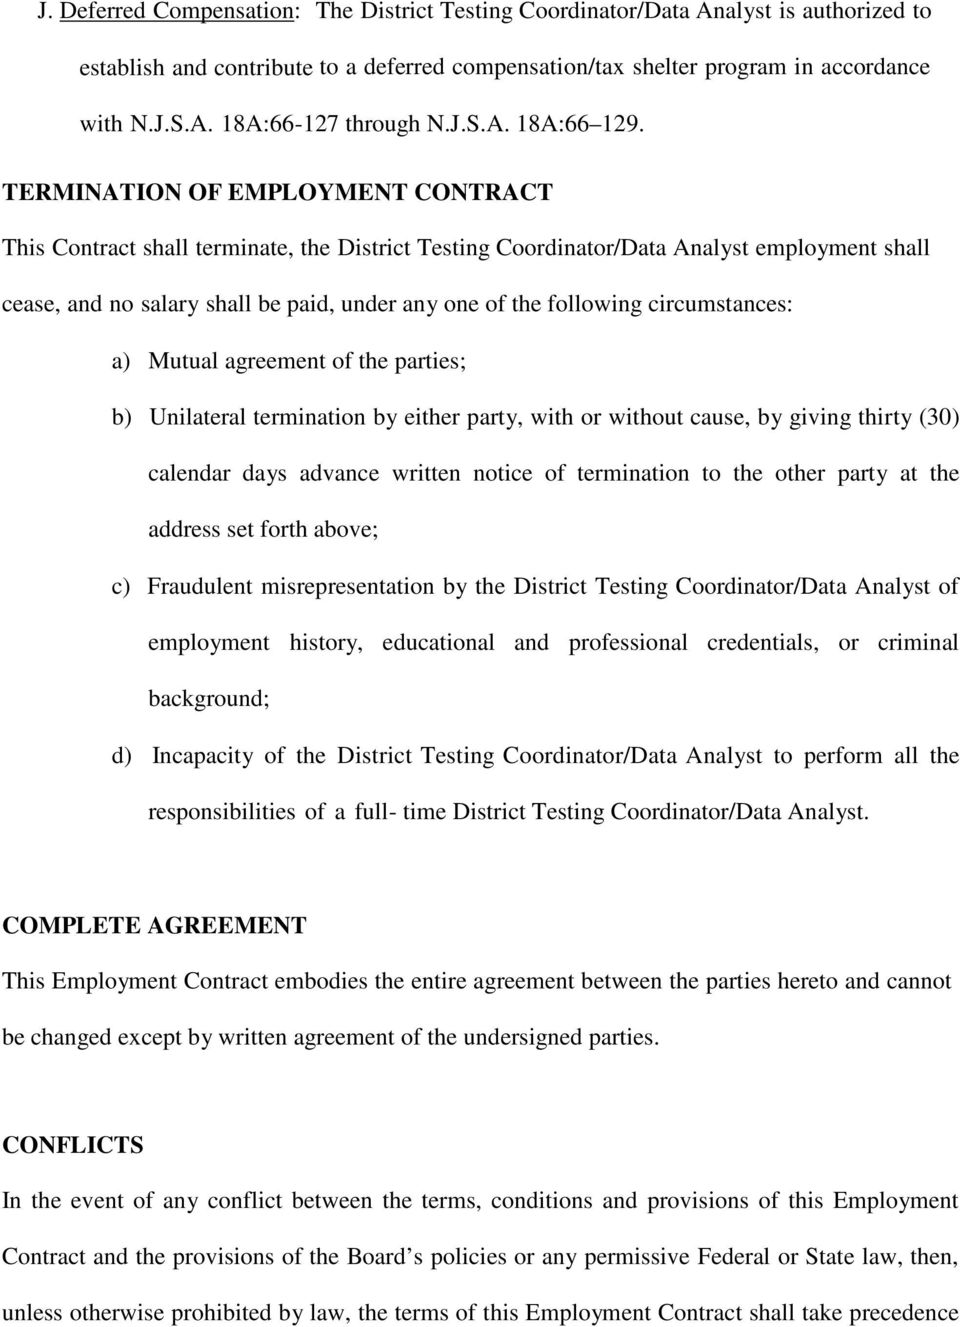 TERMINATION OF EMPLOYMENT CONTRACT This Contract shall terminate, the District Testing Coordinator/Data Analyst employment shall cease, and no salary shall be paid, under any one of the following